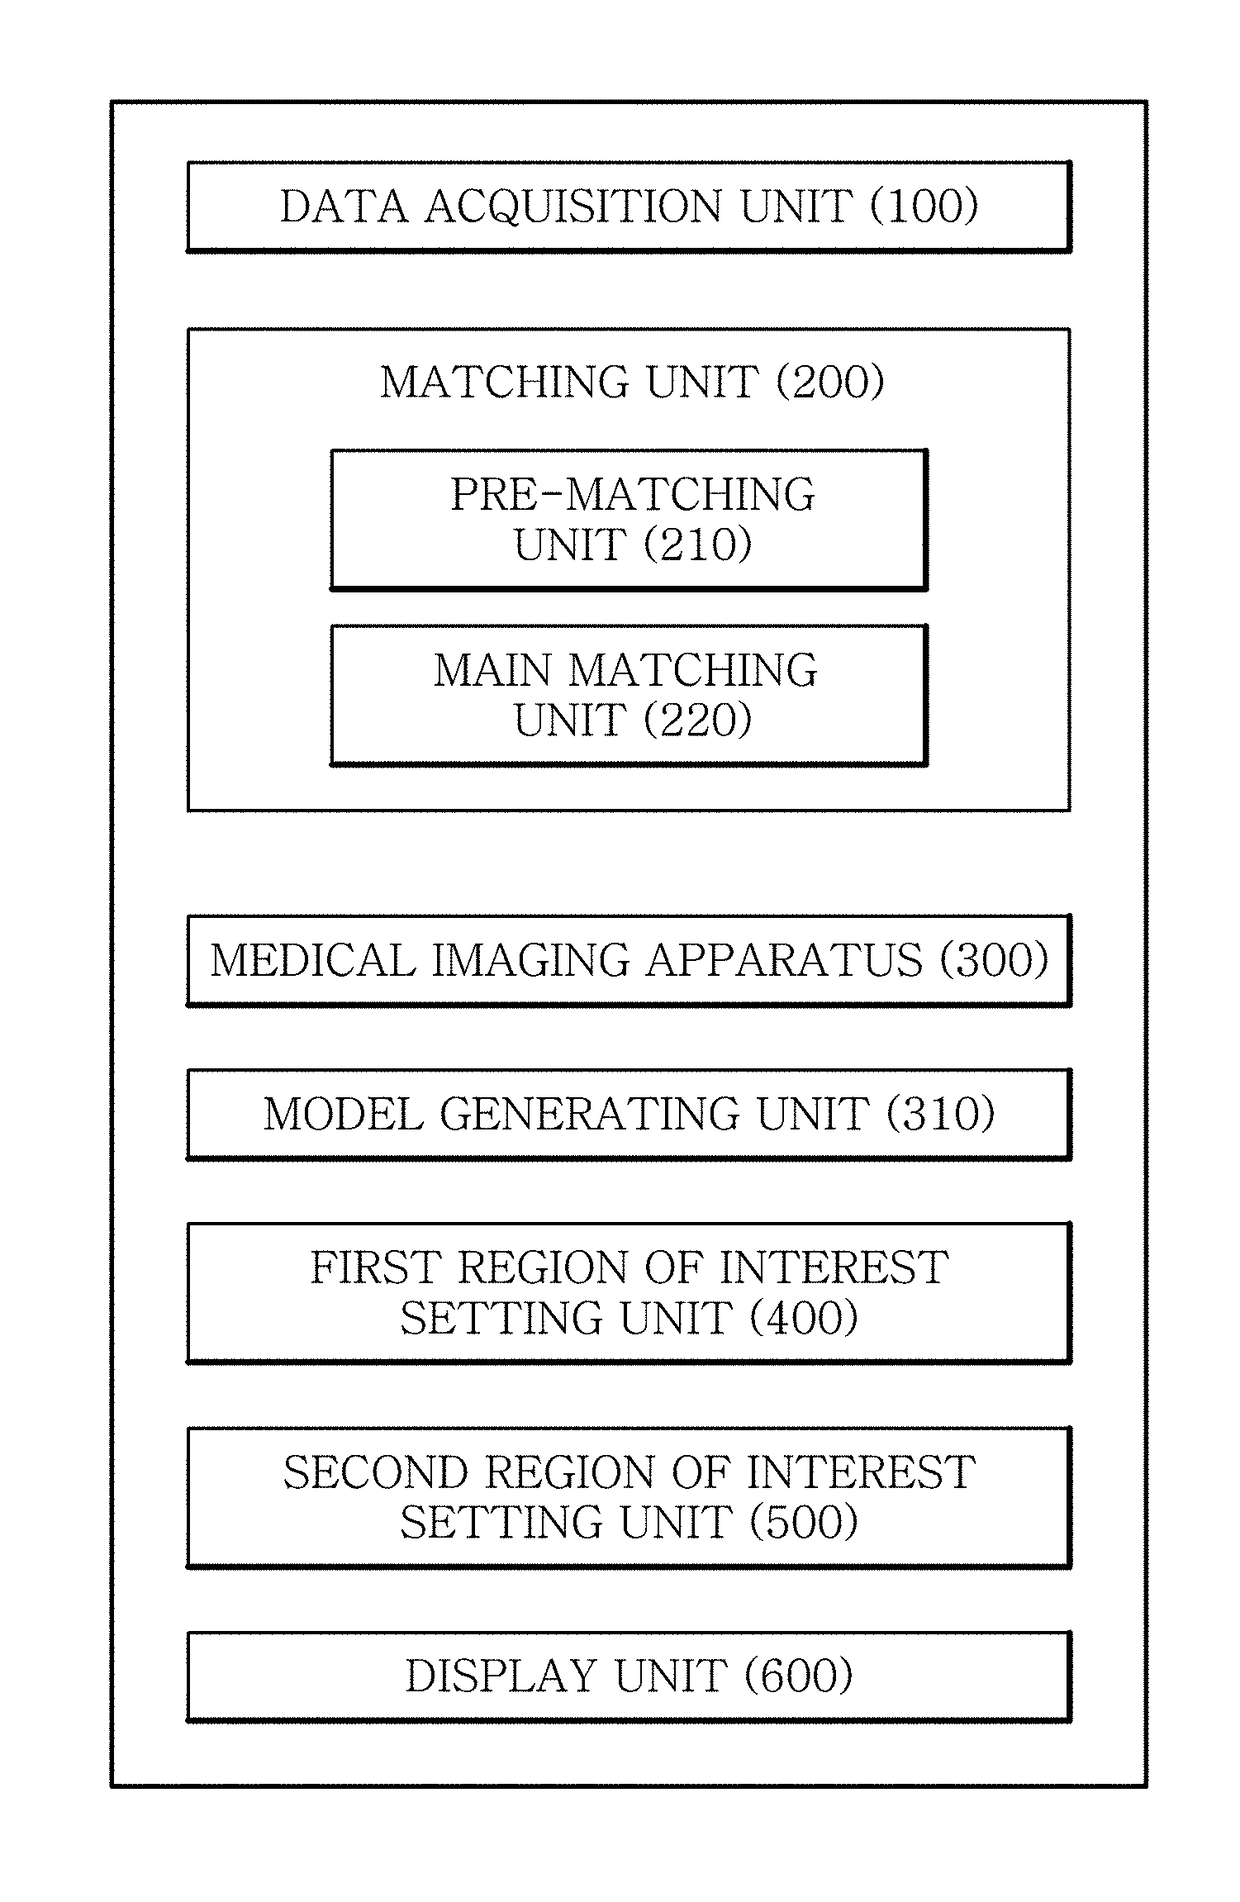 Method, apparatus and program for selective registration three-dimensional tooth image data to optical scanning tooth model